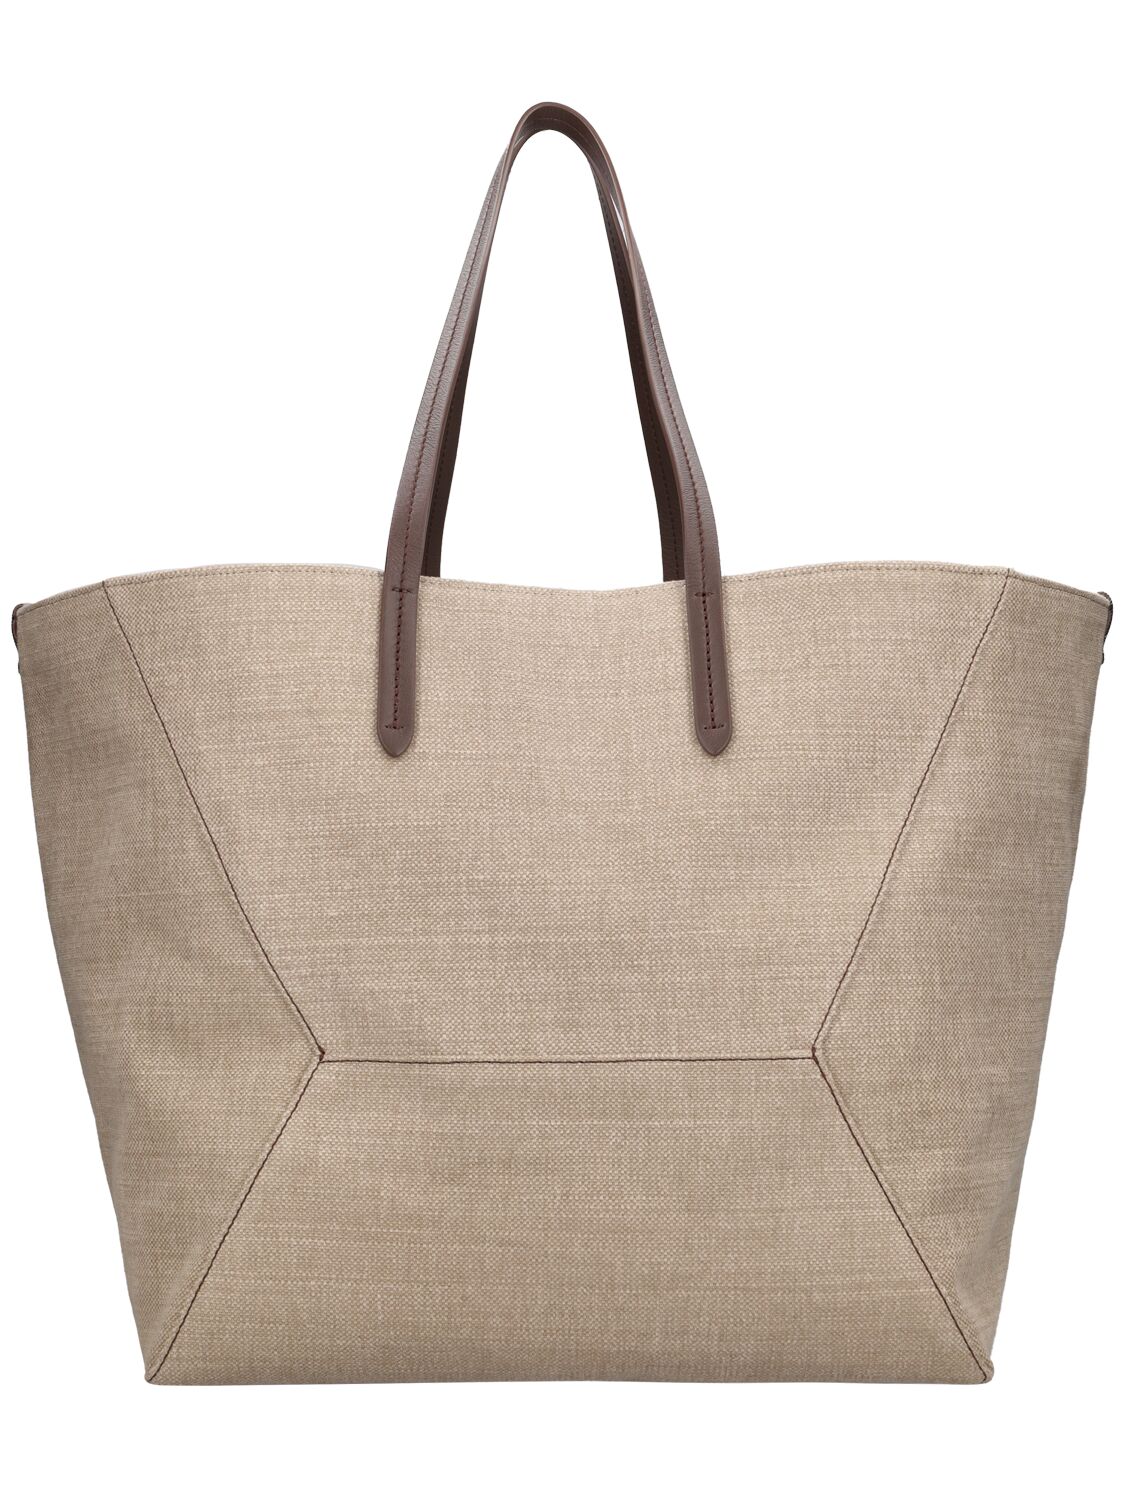 Image of Canvas & Linen Tote Bag